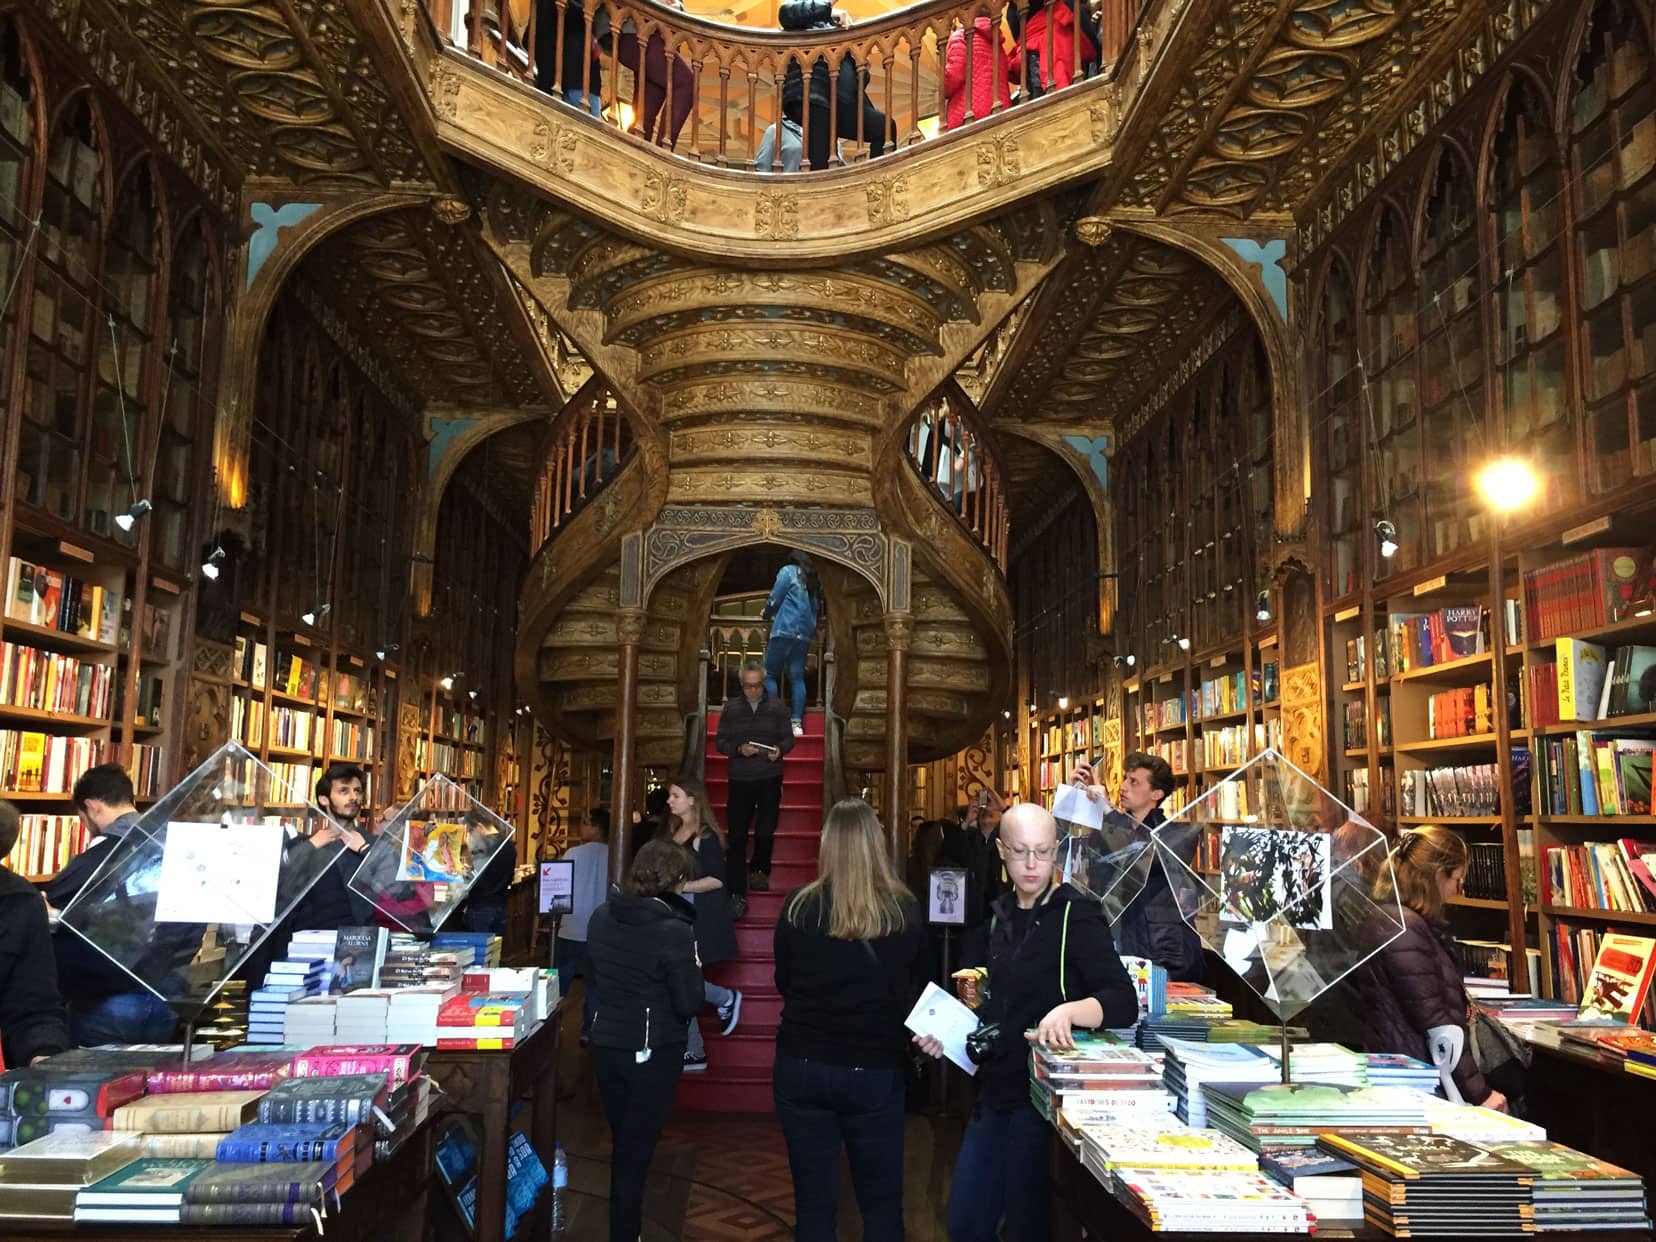 inside the Livraria lello bookshop with a double spiral red staircase and wood coloured intricate carved patterns in the artraves 